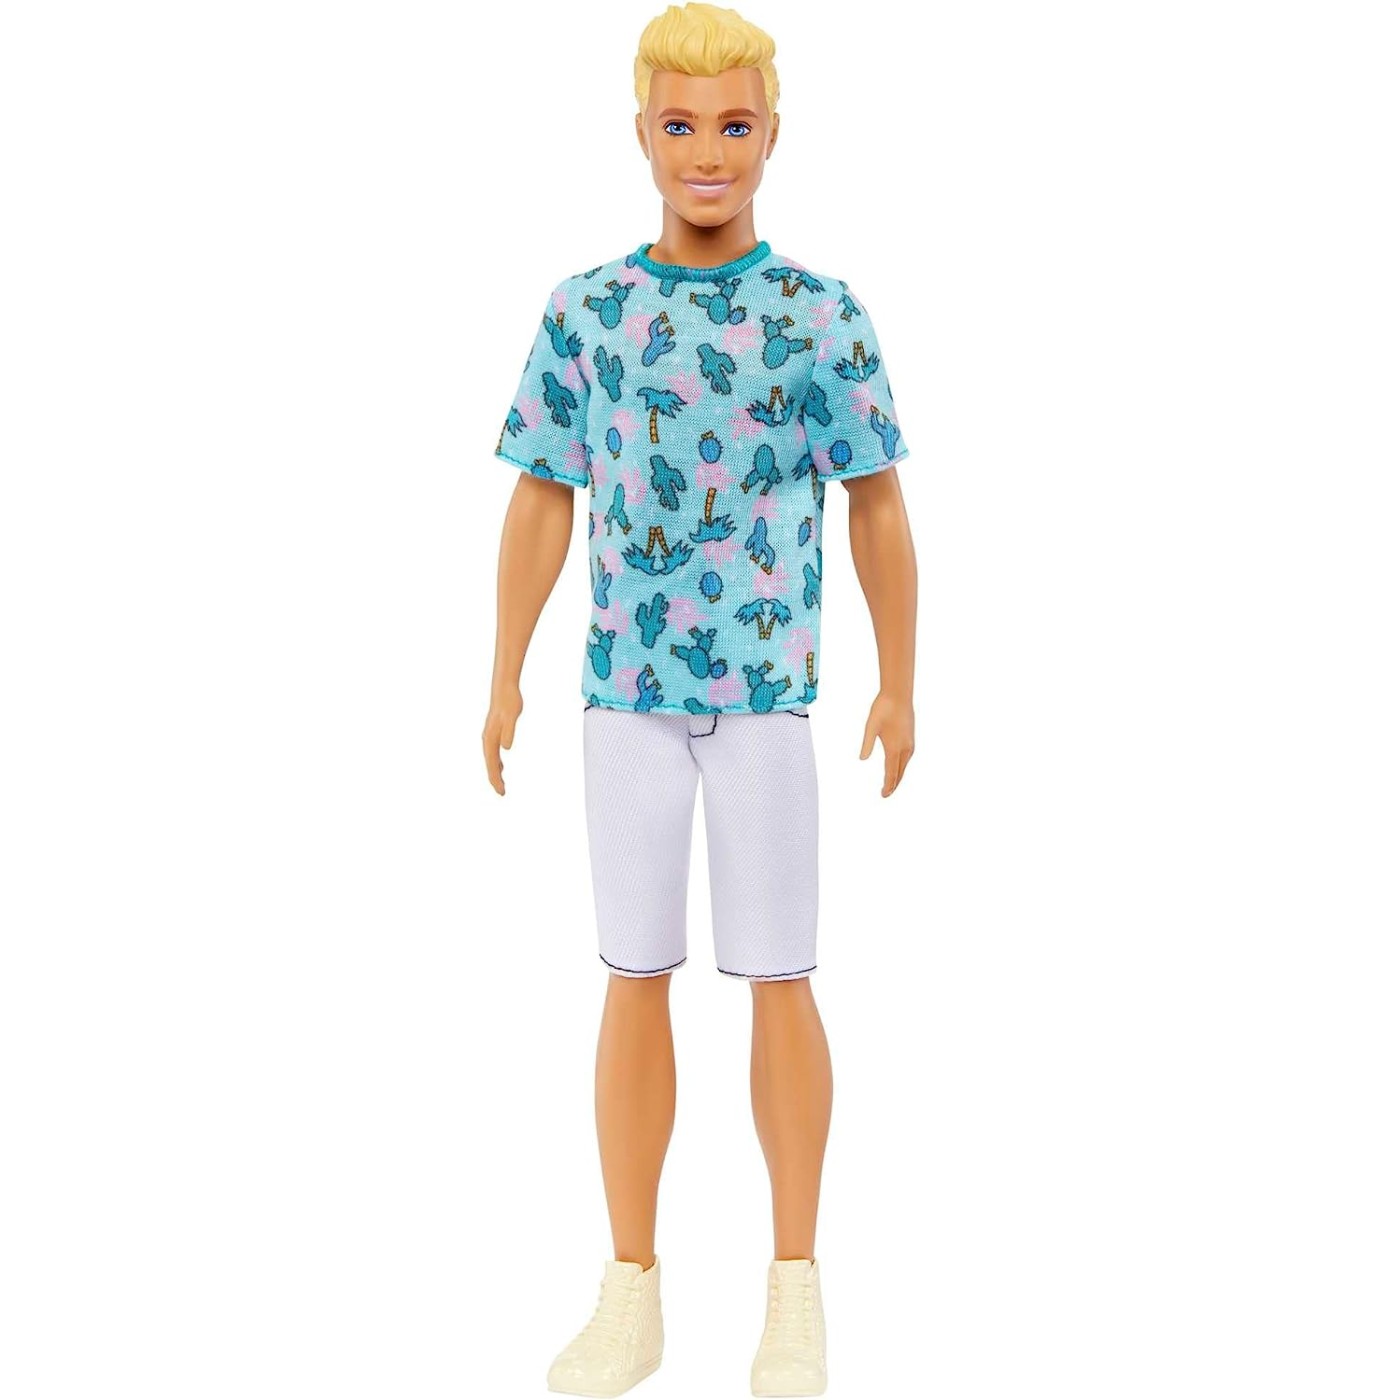 Mattel Barbie Fashionistas Ken Fashion Κούκλα Ξανθά Μαλλιά , Blue Cactus Tee, White Shorts And Sneakers (DWK44/HJT10)